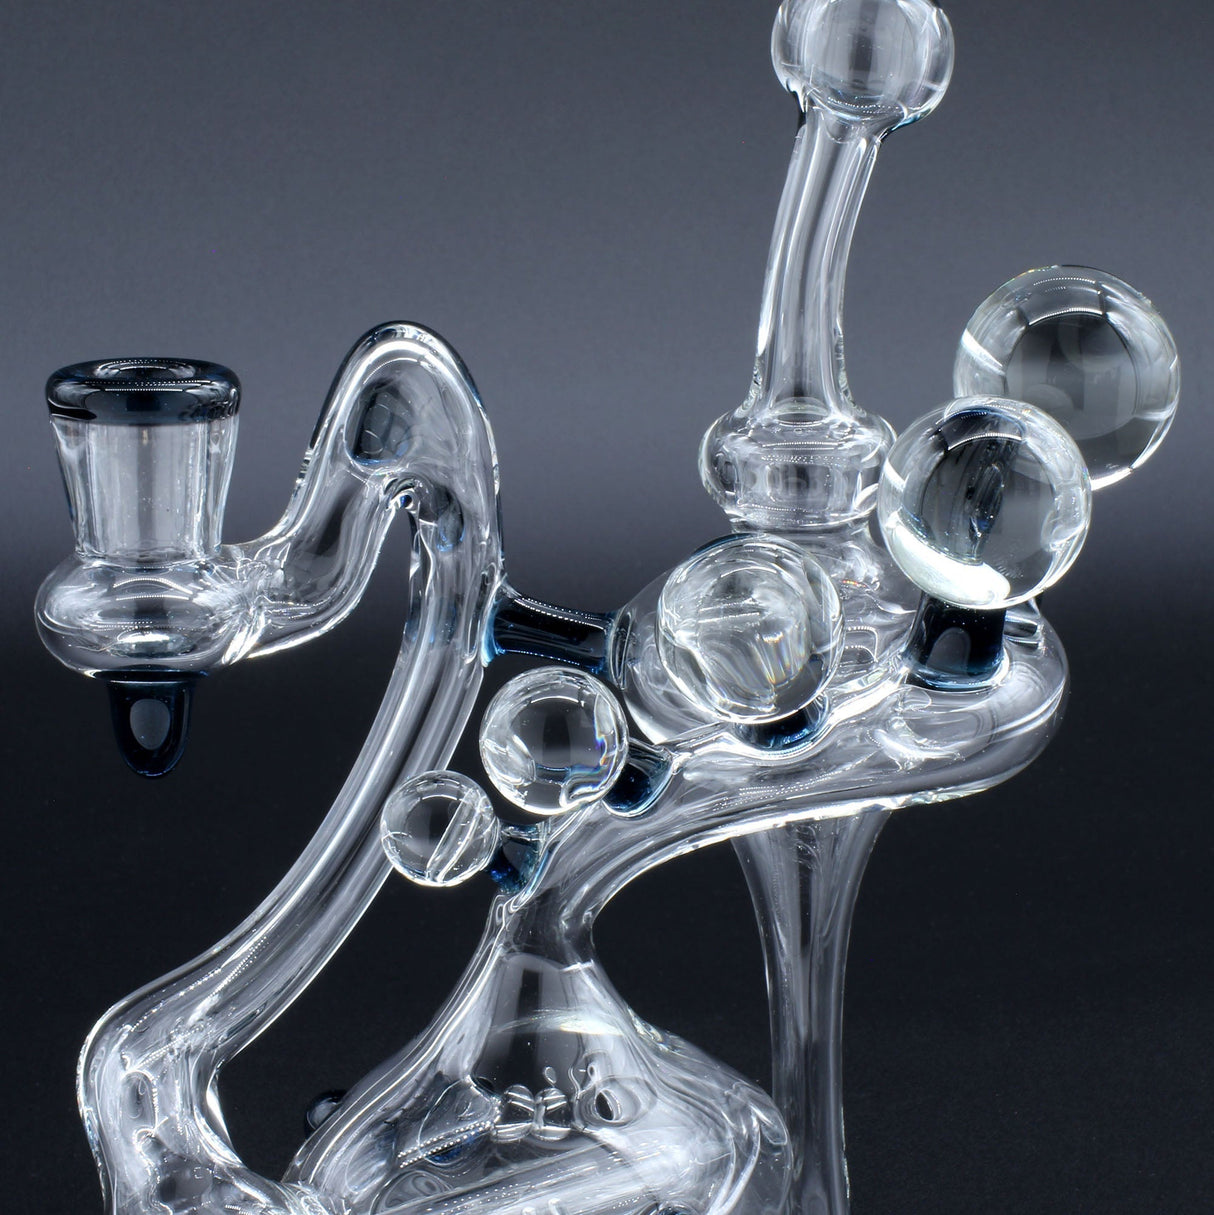 Clayball Glass "Electric Moon" Heady Recycler Dab-Rig with intricate glasswork, front view on a black background